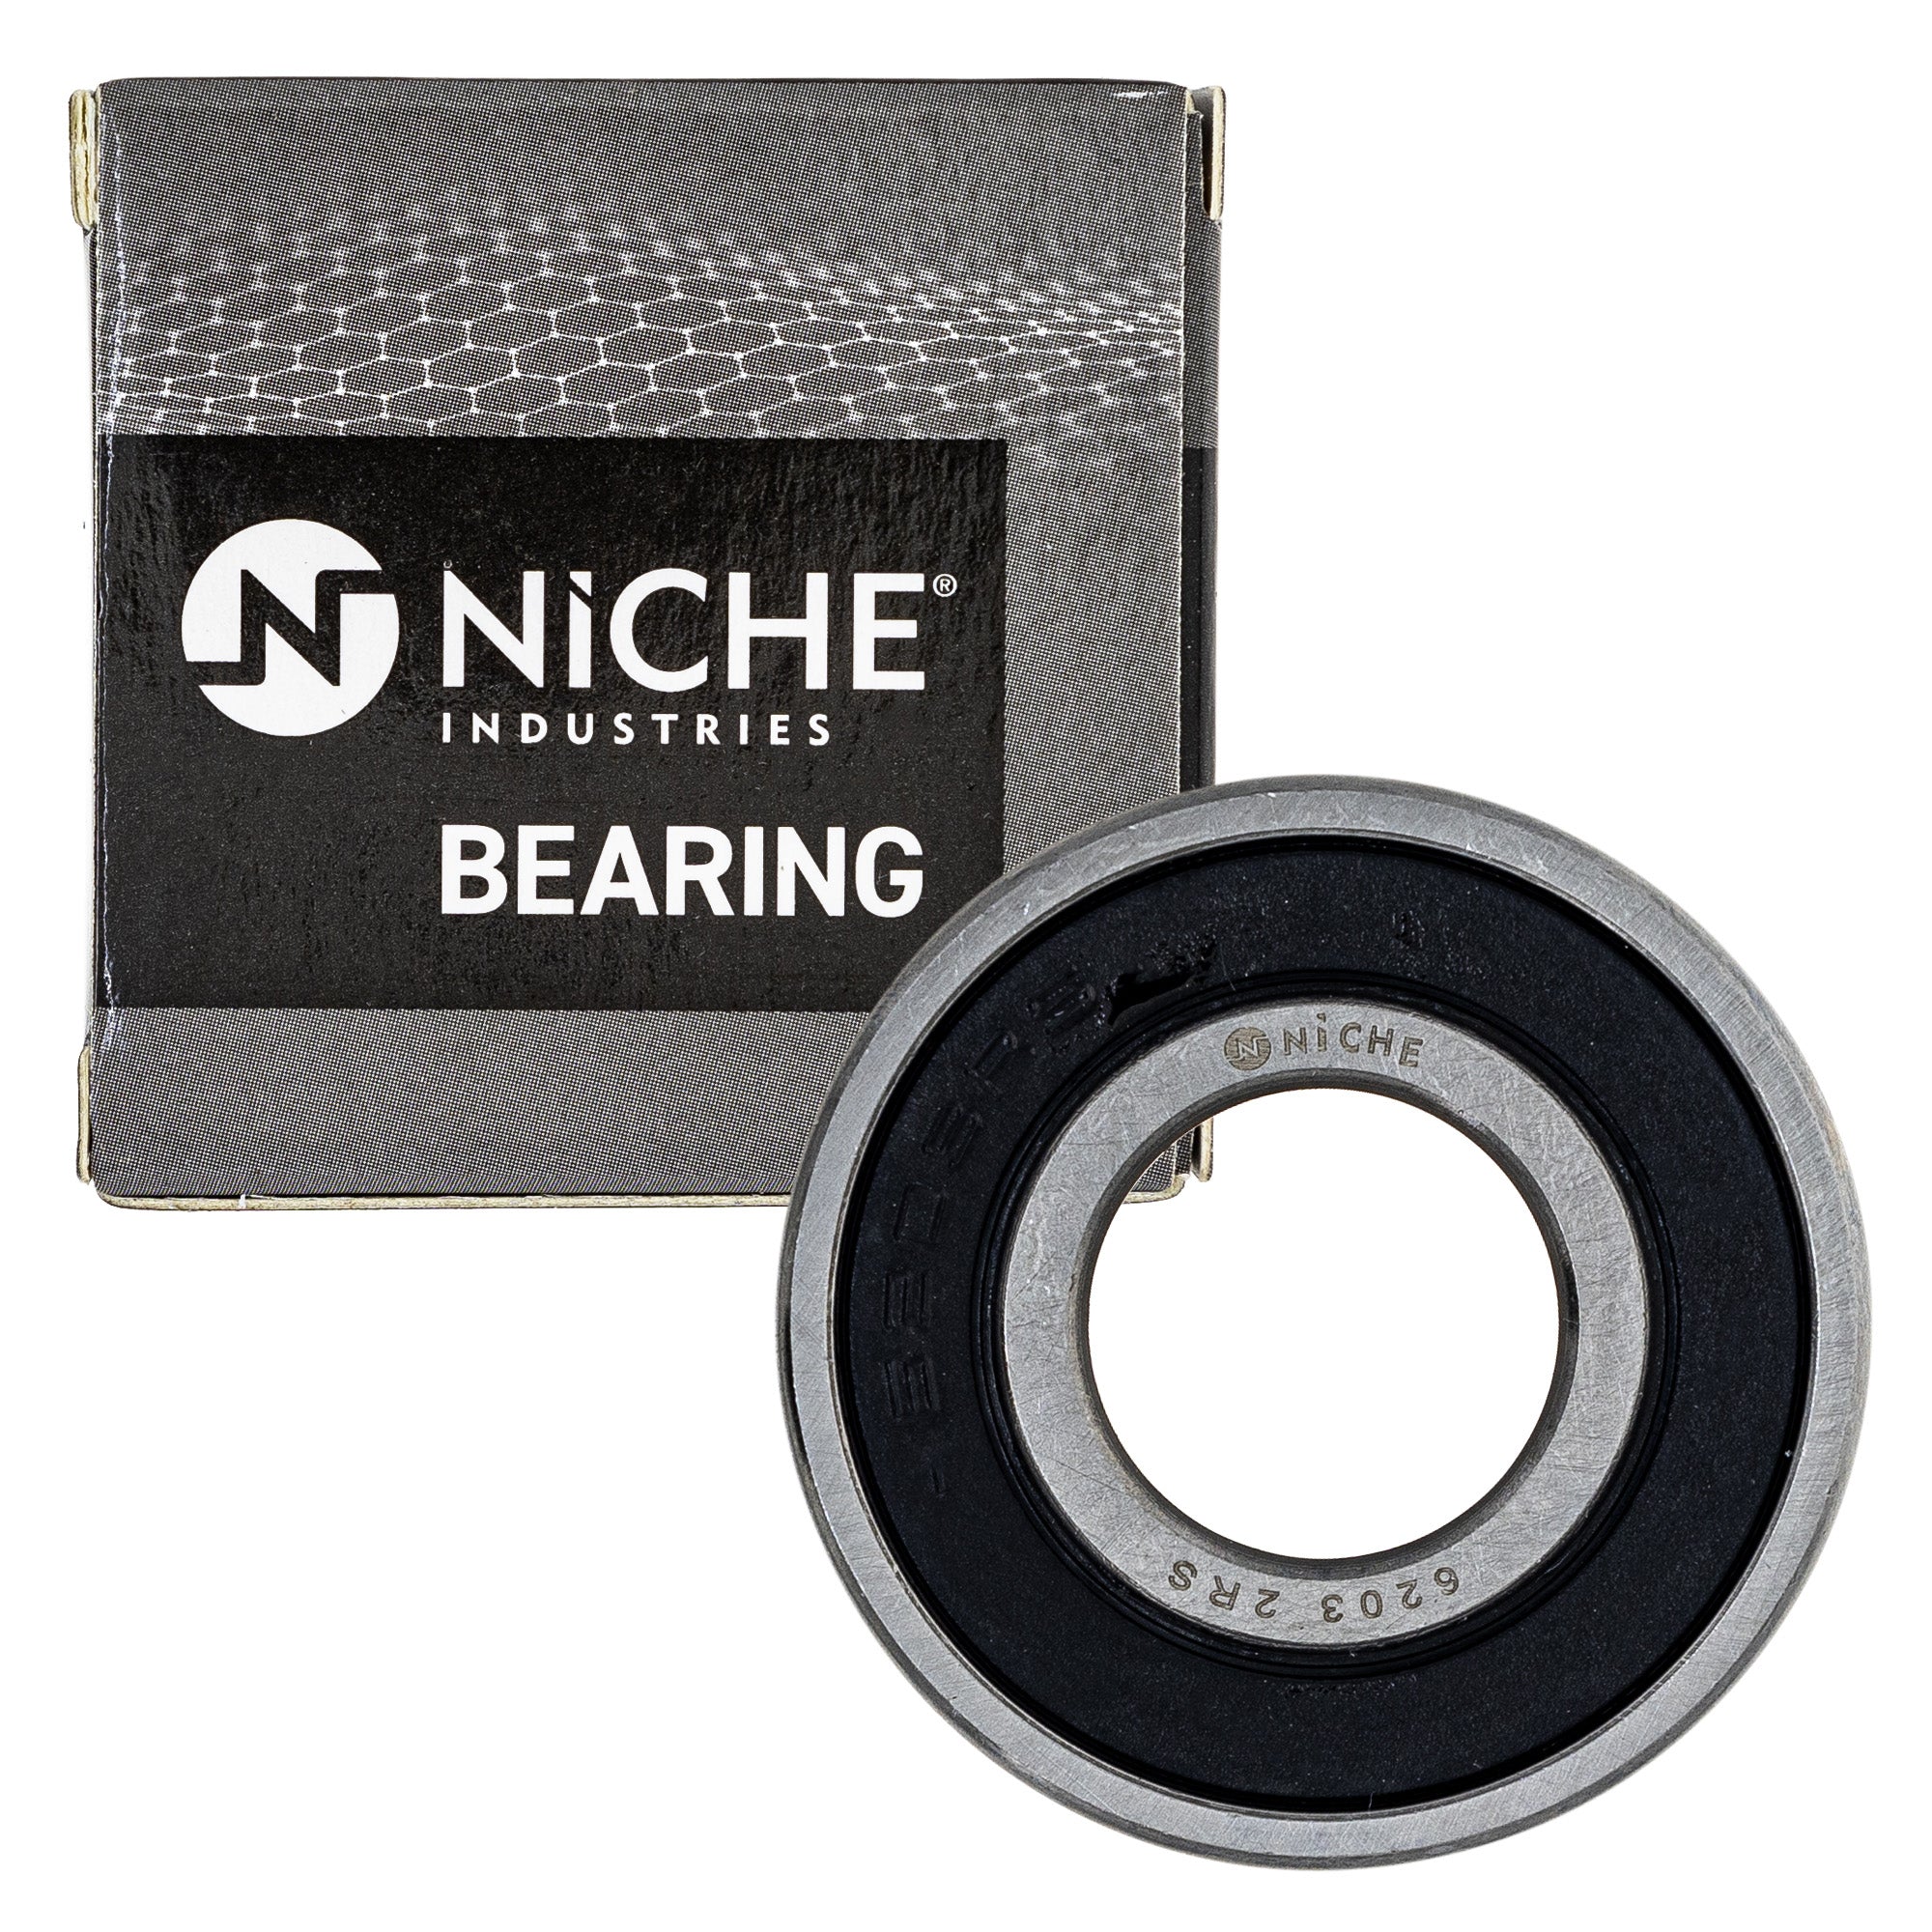 NICHE MK1009200 Wheel Bearing Seal Kit for zOTHER Ref No XSR900